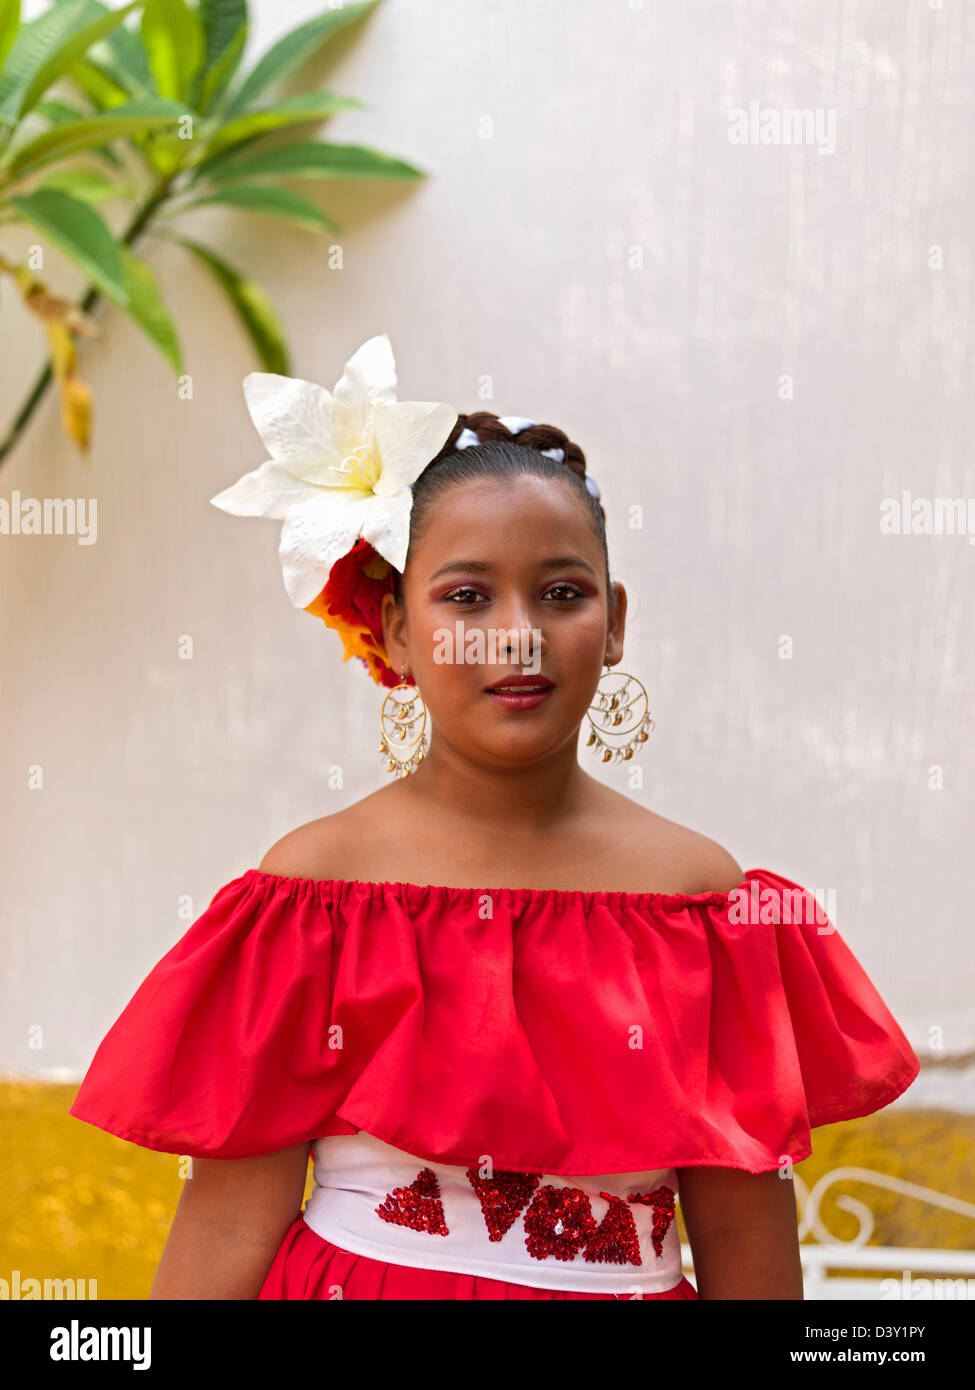 Mexico, Jalisco, Tequila, portrait of a young Mexican girl dancer in folkloric costume Stock Photo